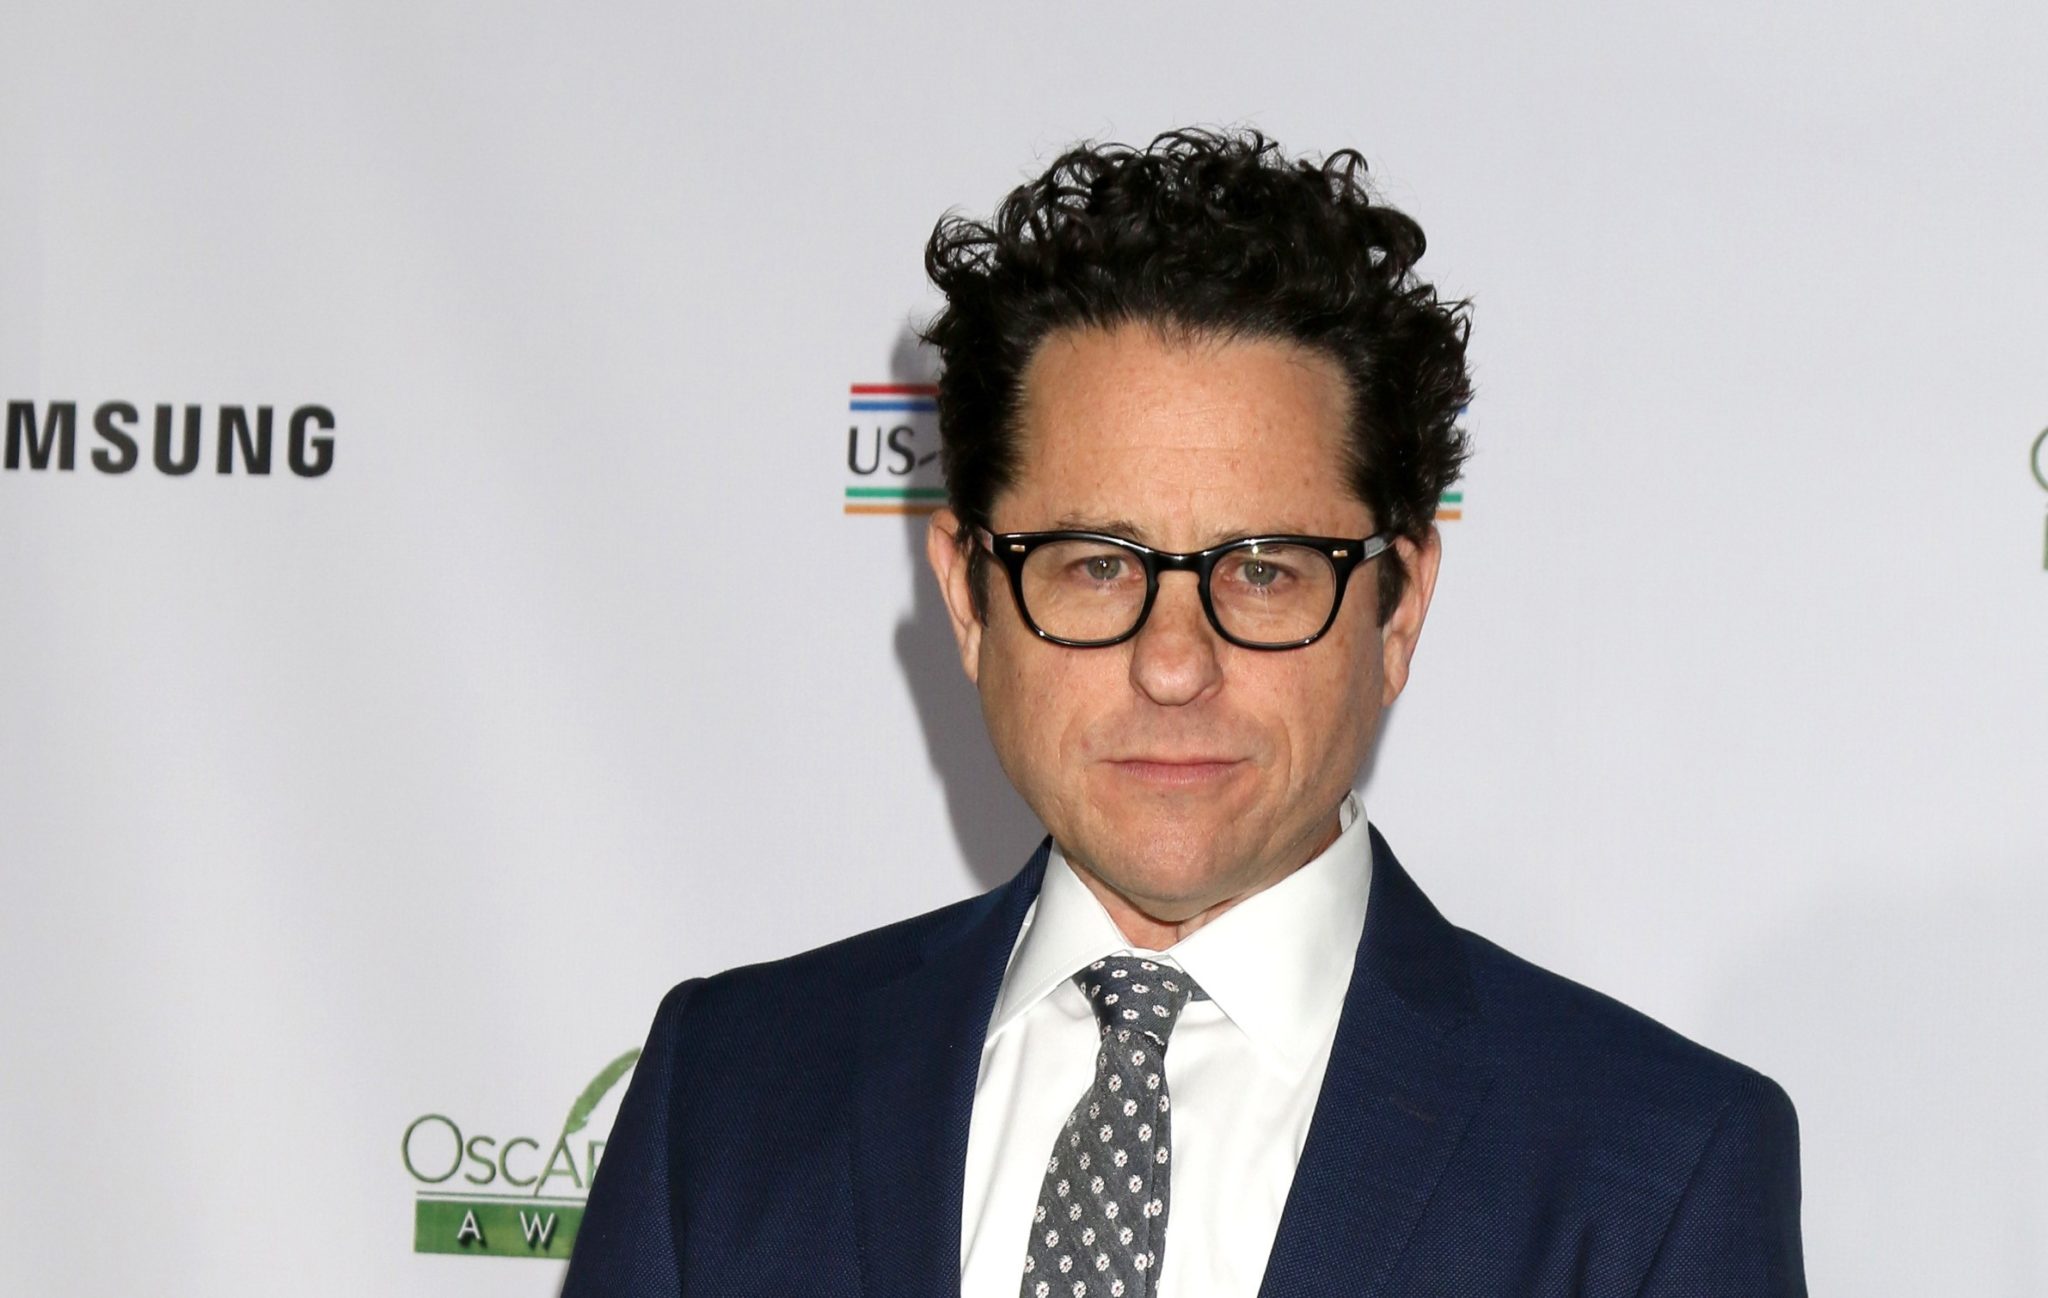 J.J. Abrams Realizes He Maybe Shouldn’t Have Haphazardly Thrown Together a ‘Star Wars’ Trilogy With No Plan